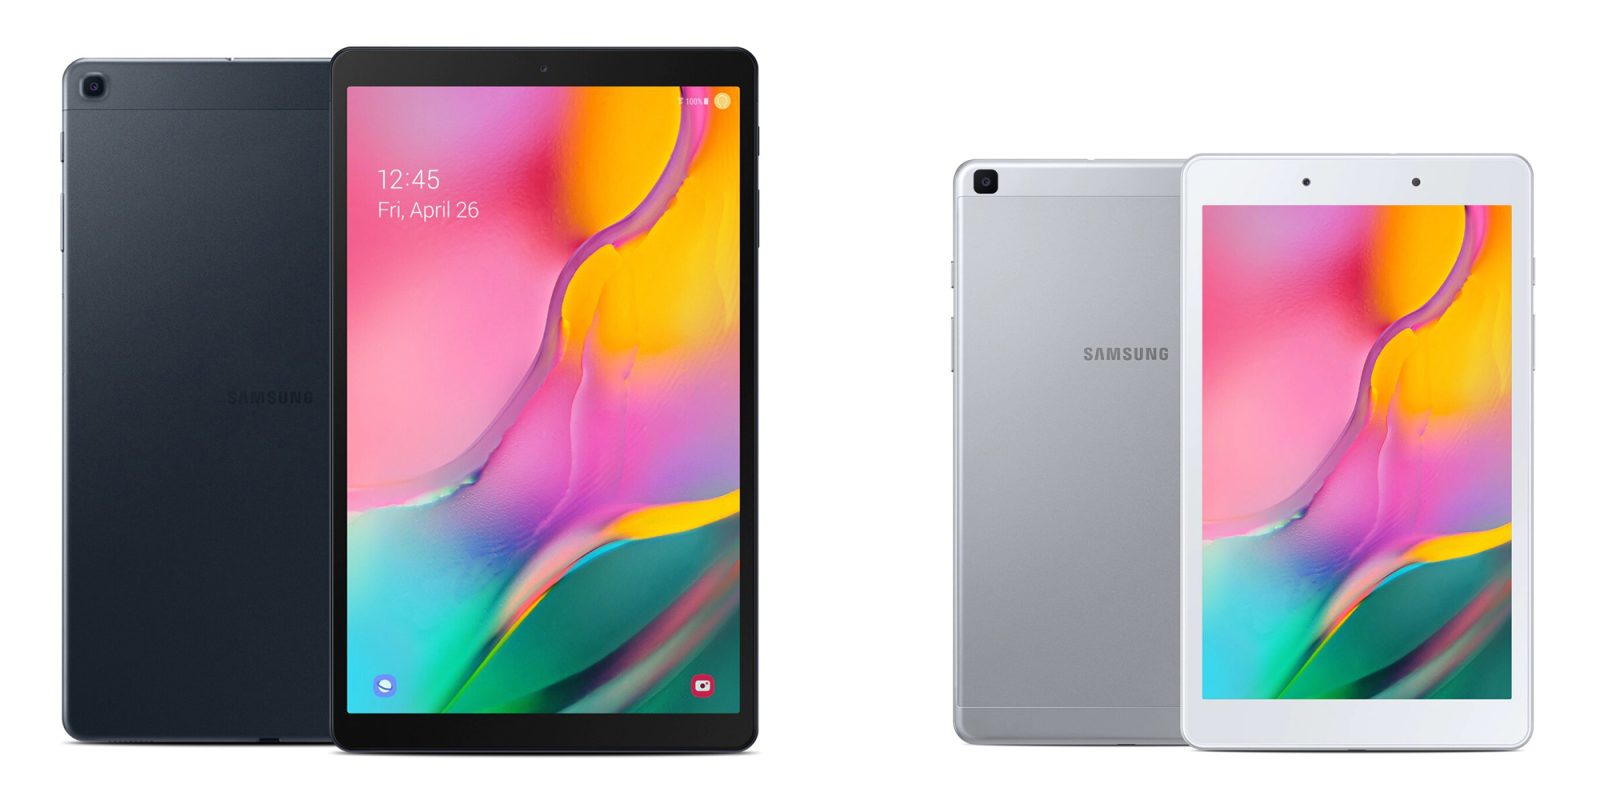 Android 10 for Samsung Galaxy Tab A 10.1 and Tab A 8.0